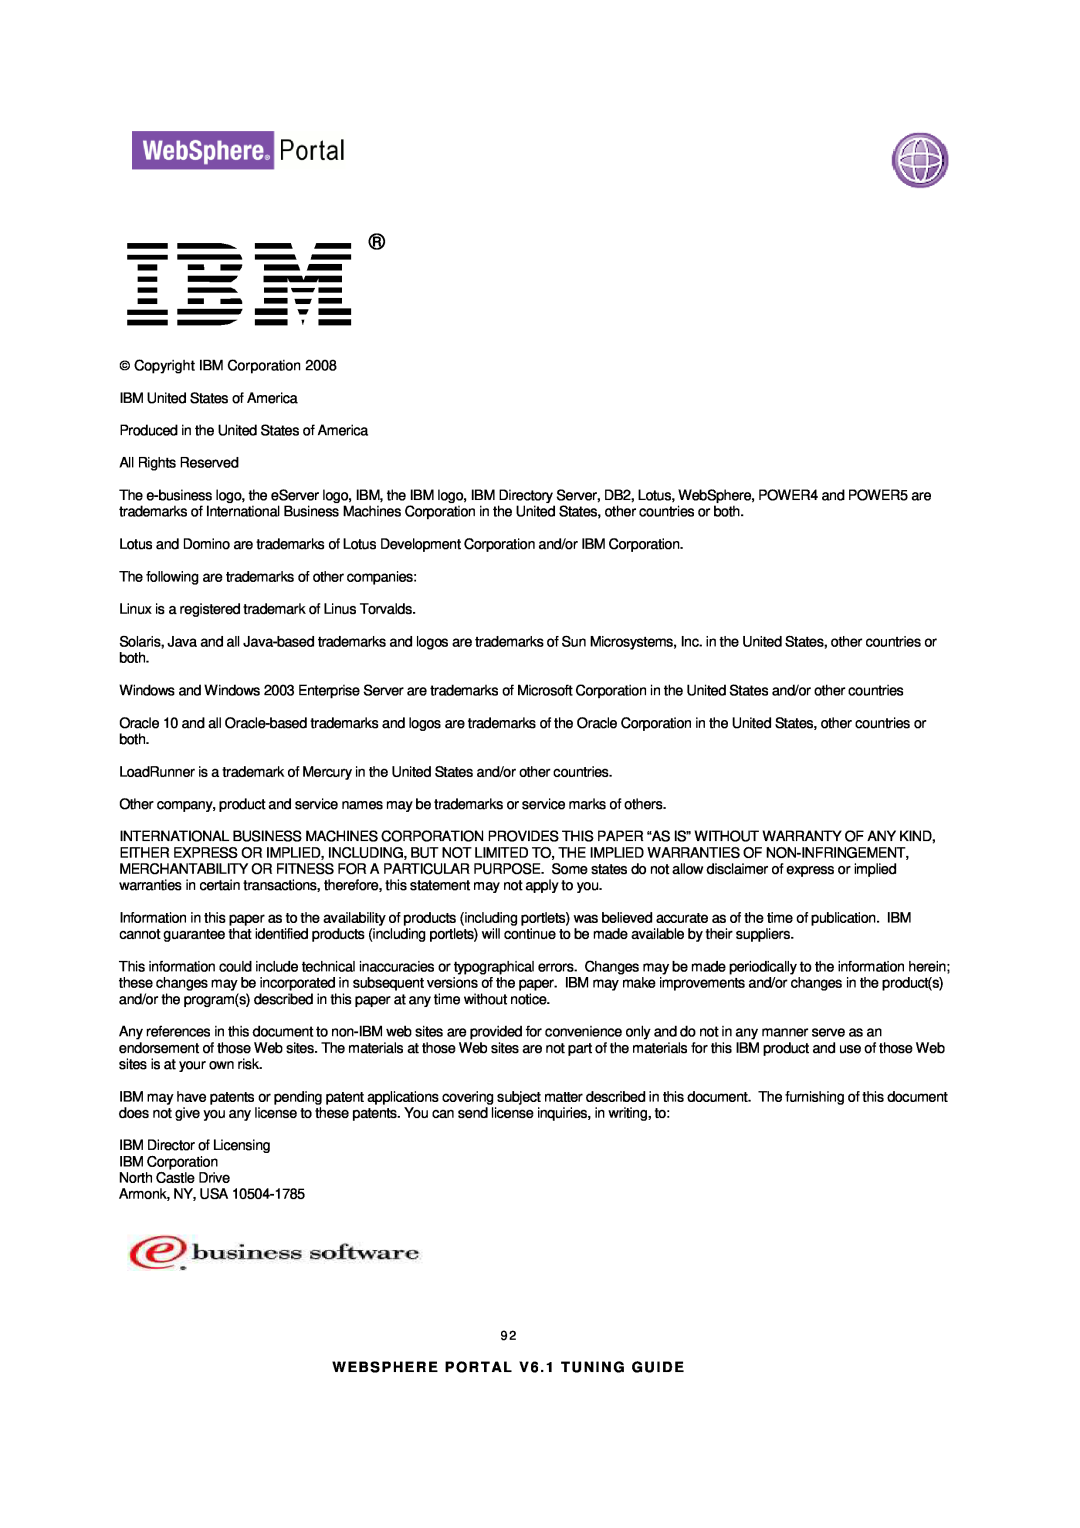 IBM 6.1.X manual The following are trademarks of other companies, W E BS P HE R E P O R T AL V 6 . 1 T U N I N G G U I D E 